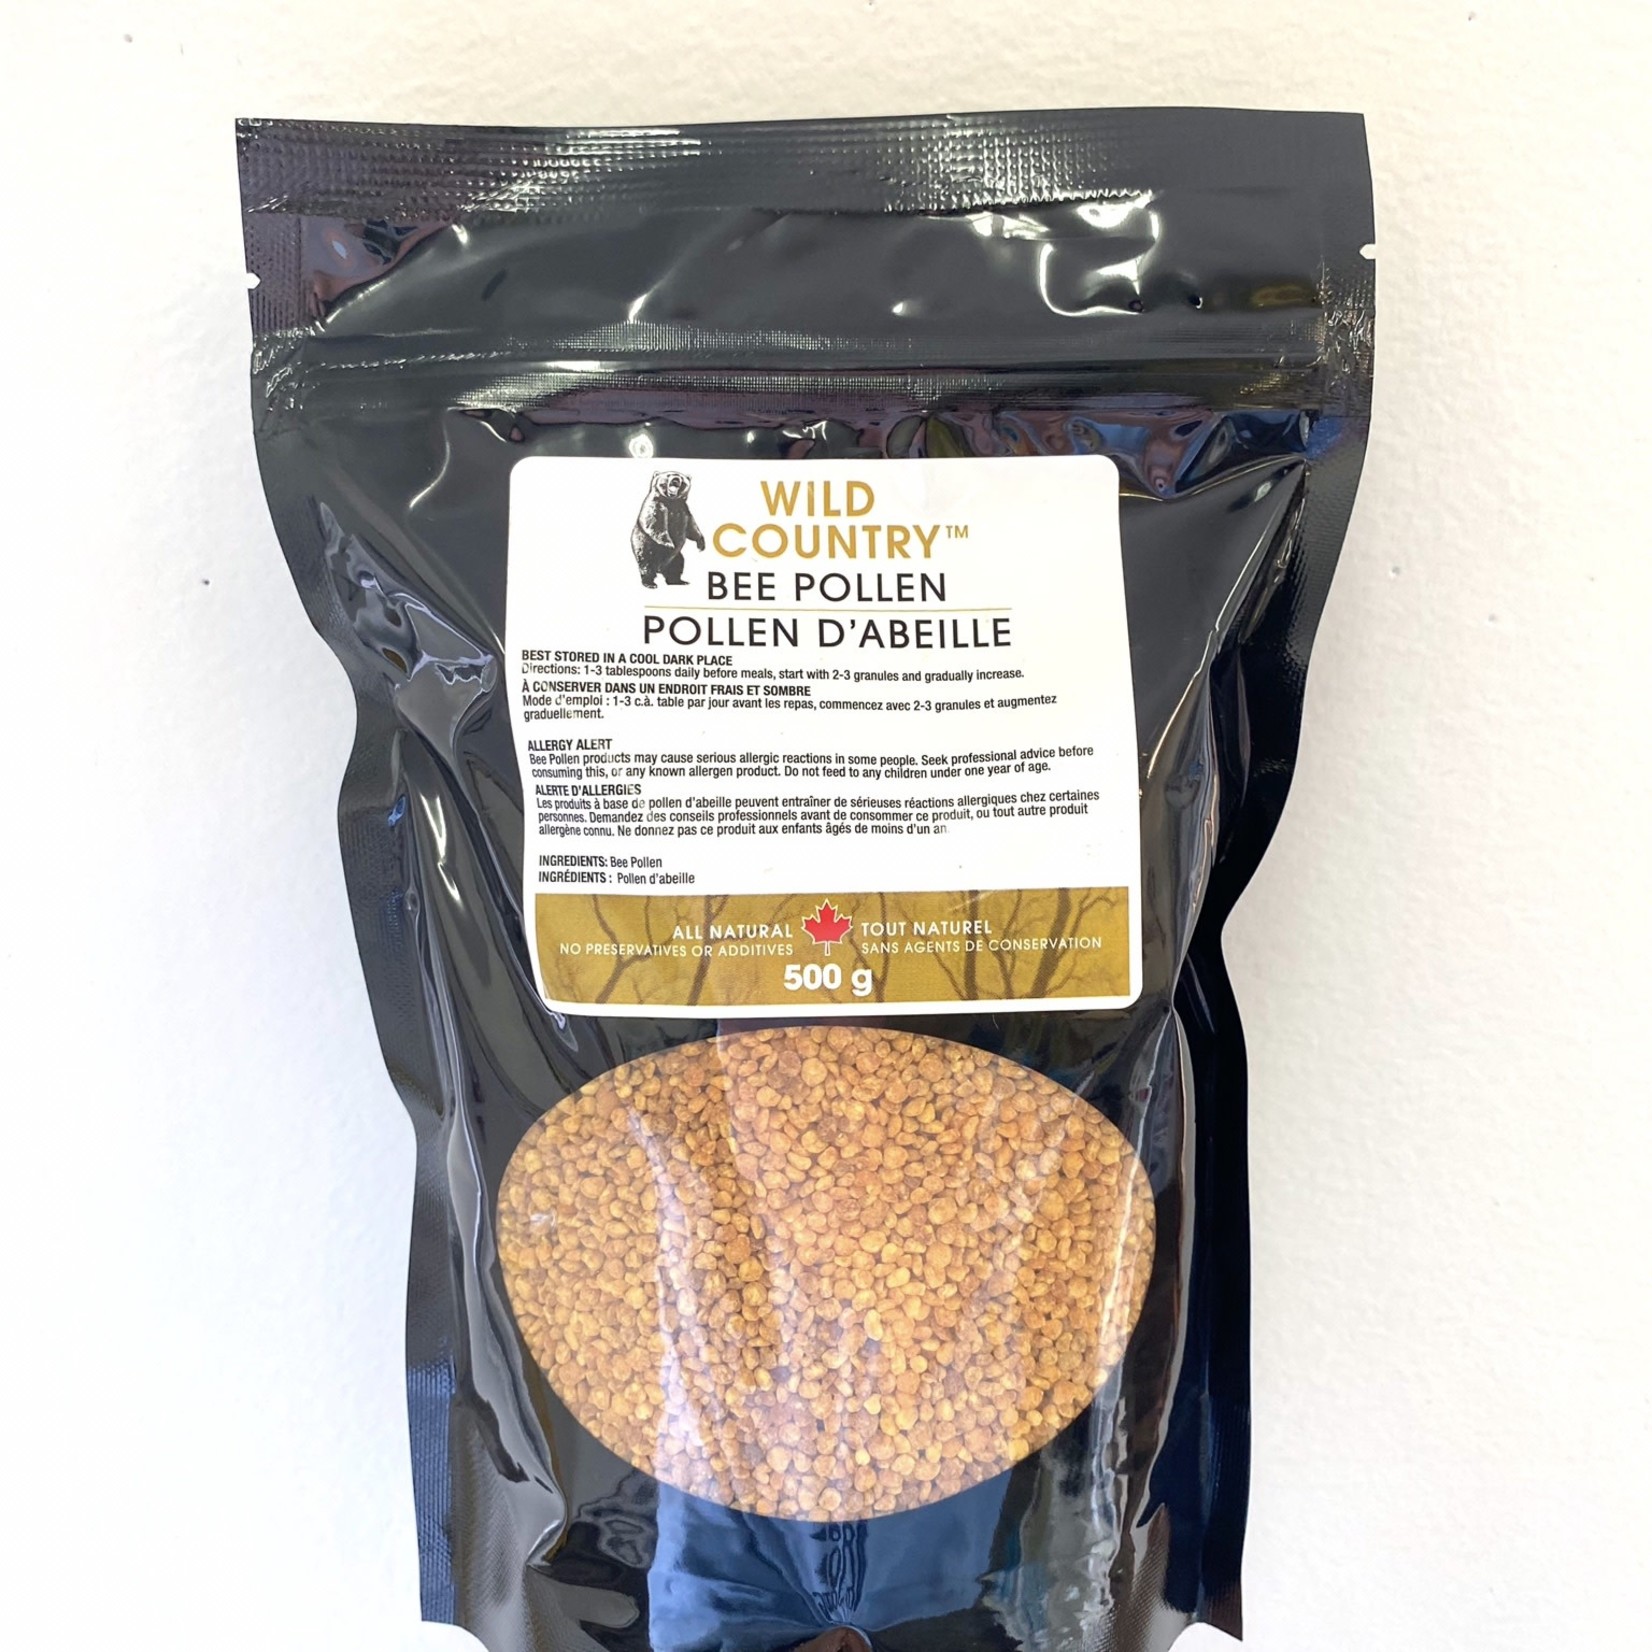 Wild Country Wild Country Bee Pollen Granules 500g